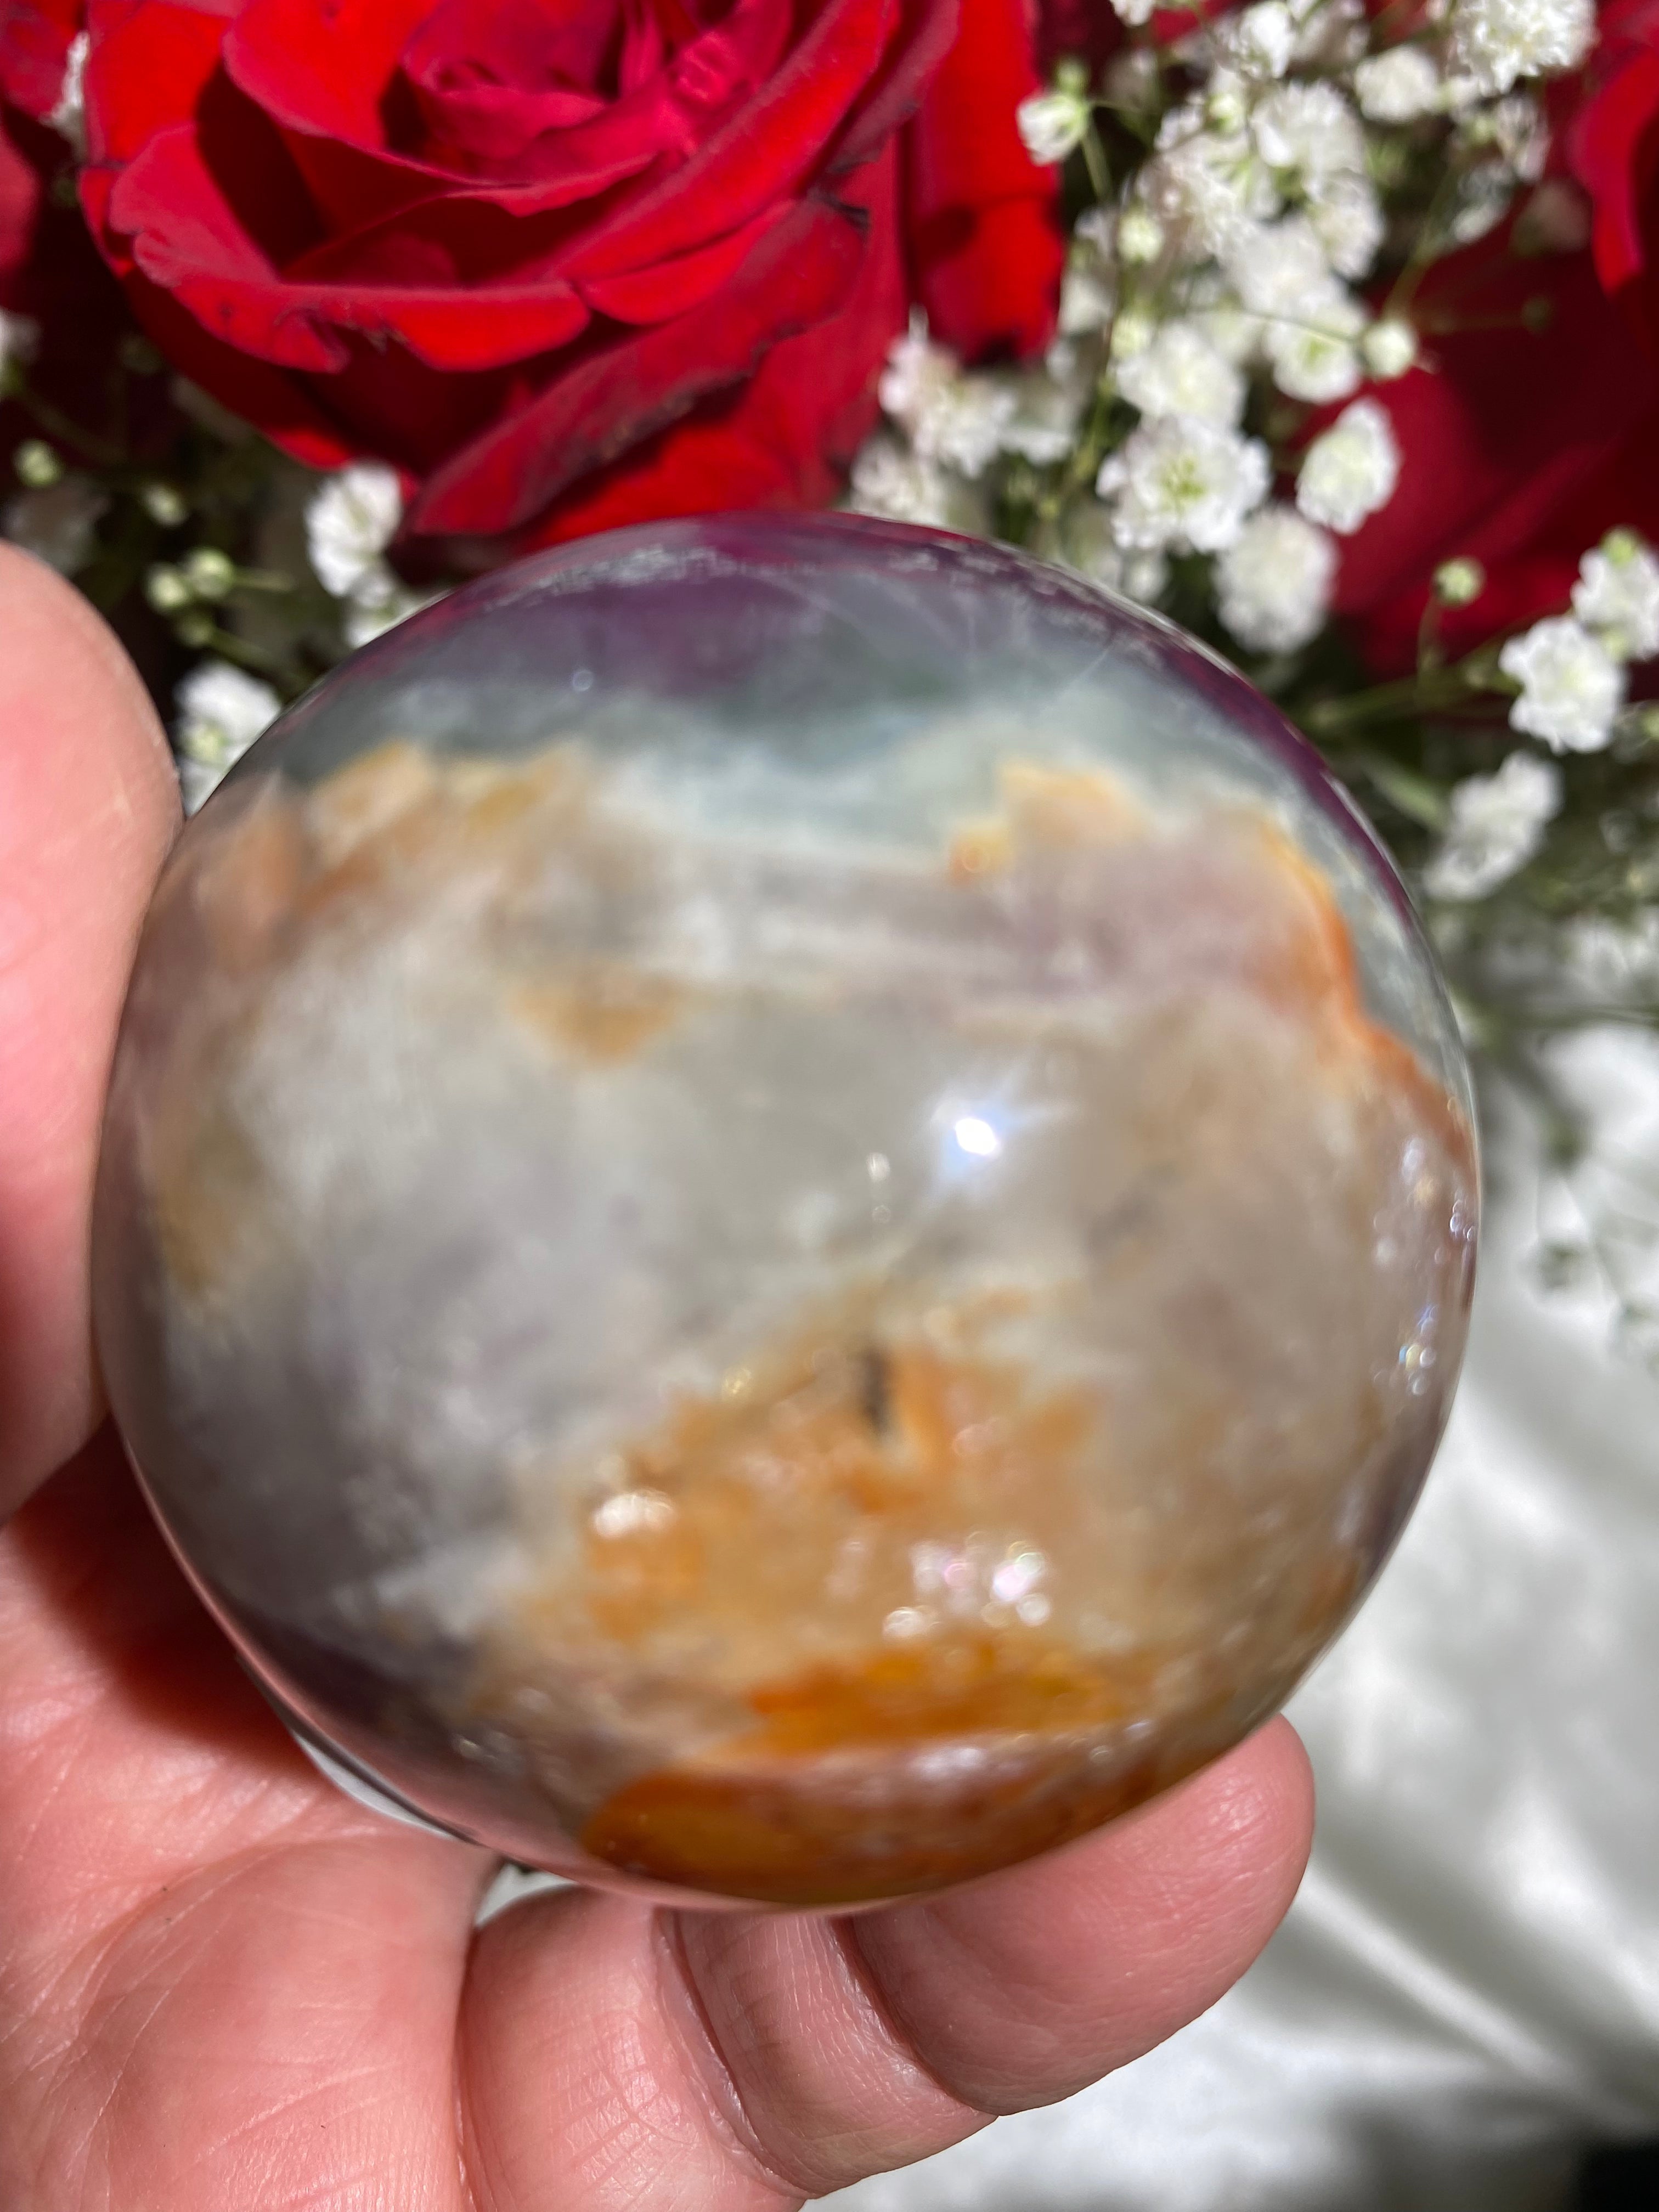 Iron-Included Fluorite Sphere (F)